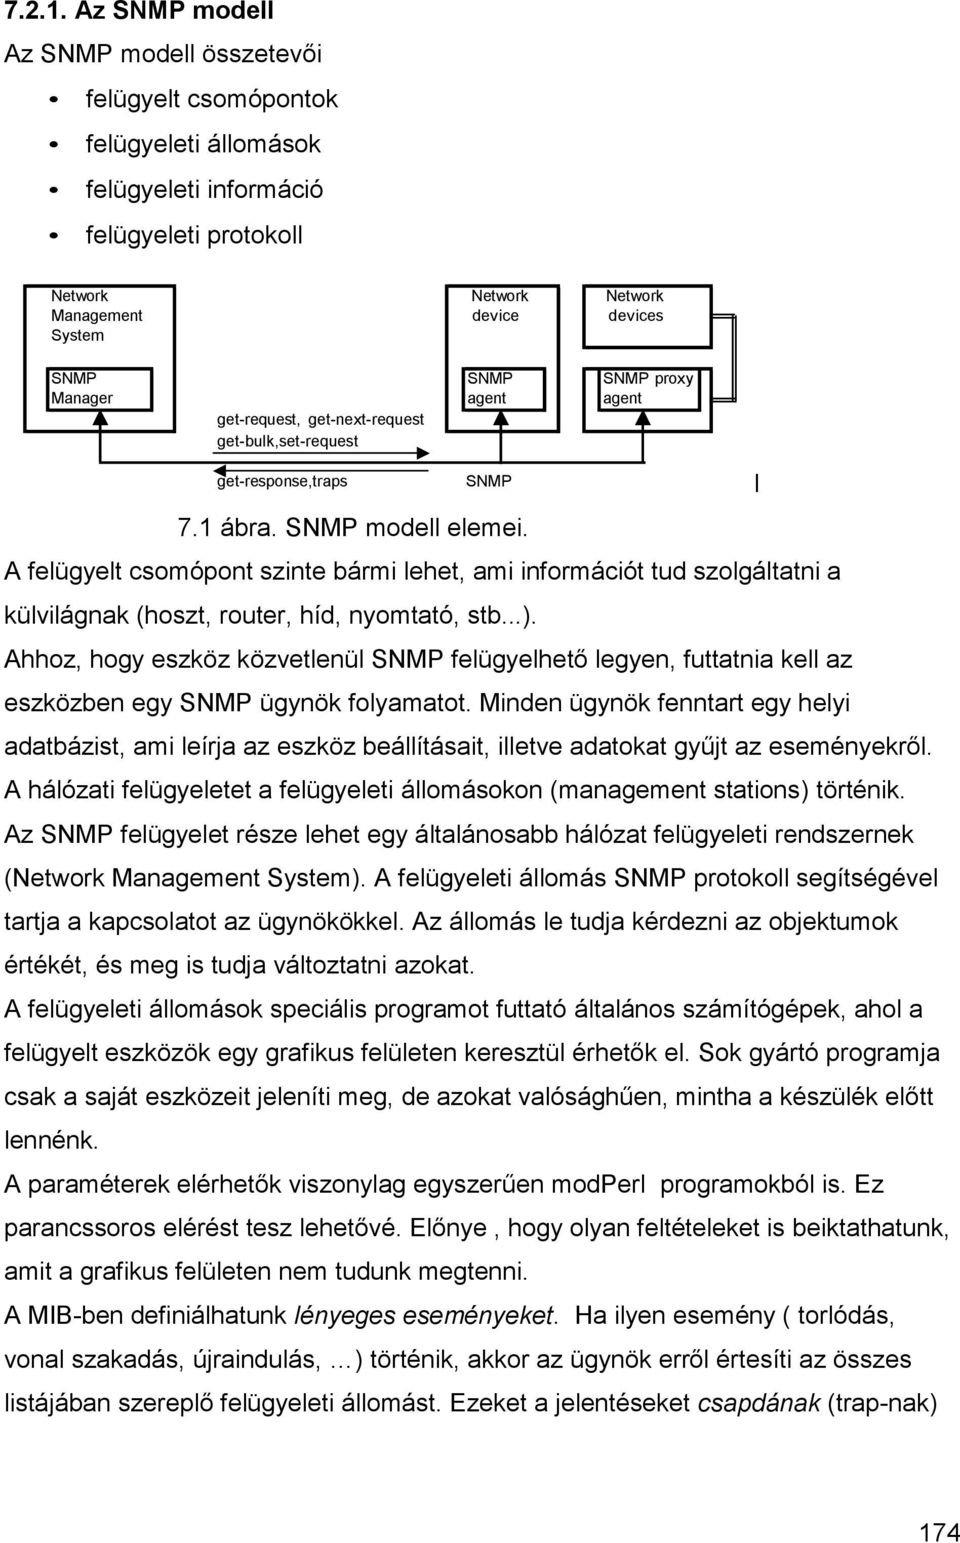 SNMP proxy Manager agent agent get-request, get-next-request get-bulk,set-request get-response,traps SNMP l 7.1 ábra. SNMP modell elemei.